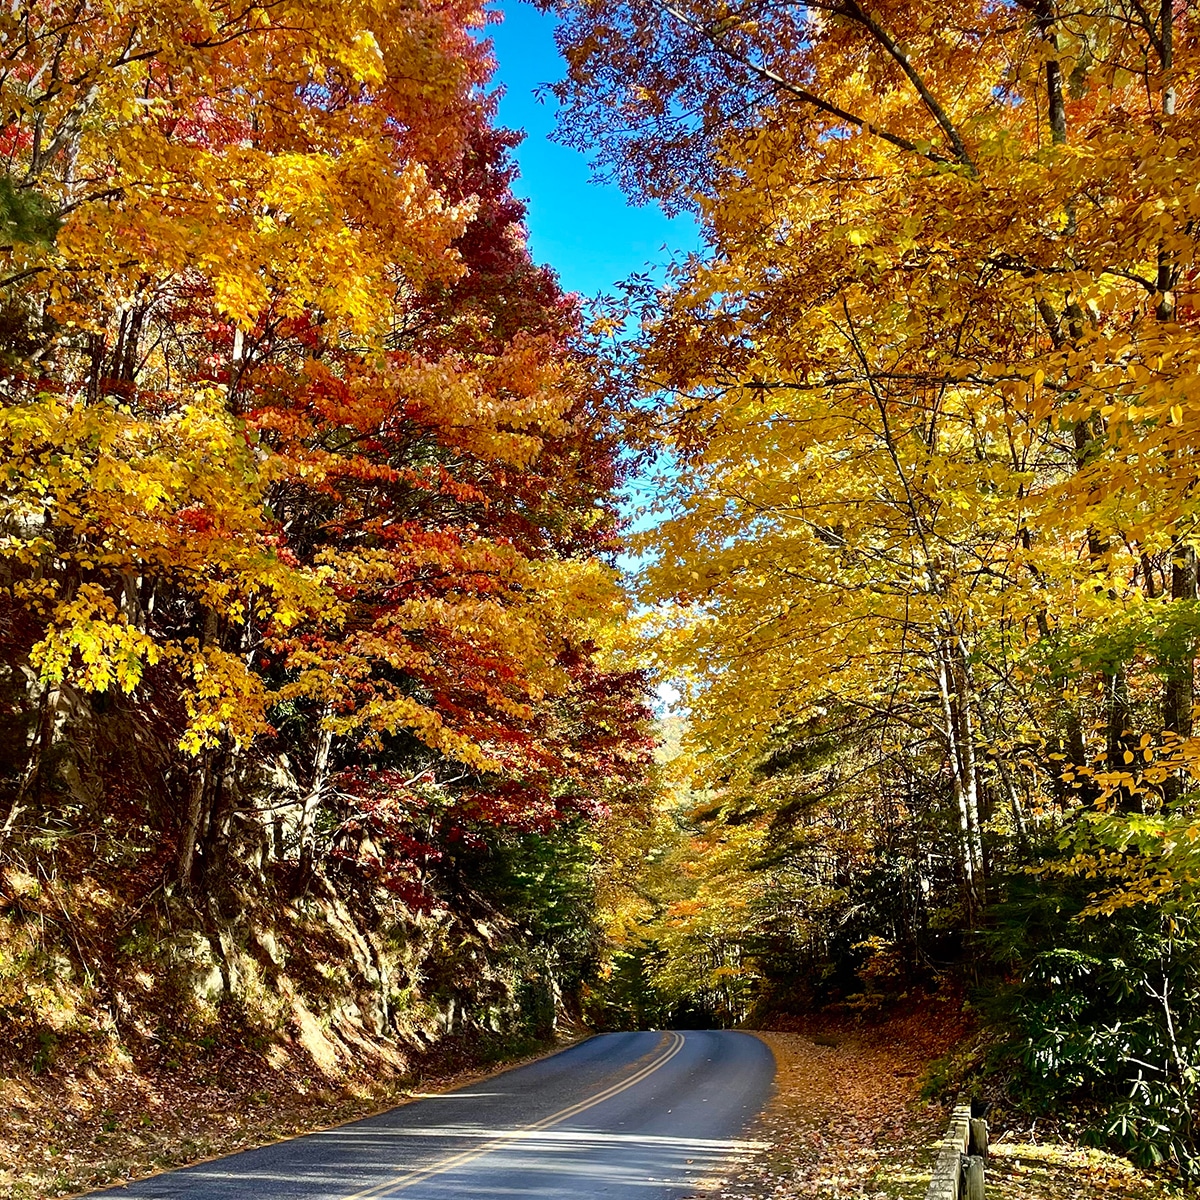 A road in North Carolina with trees on both sides displaying multi colored fall leaves.